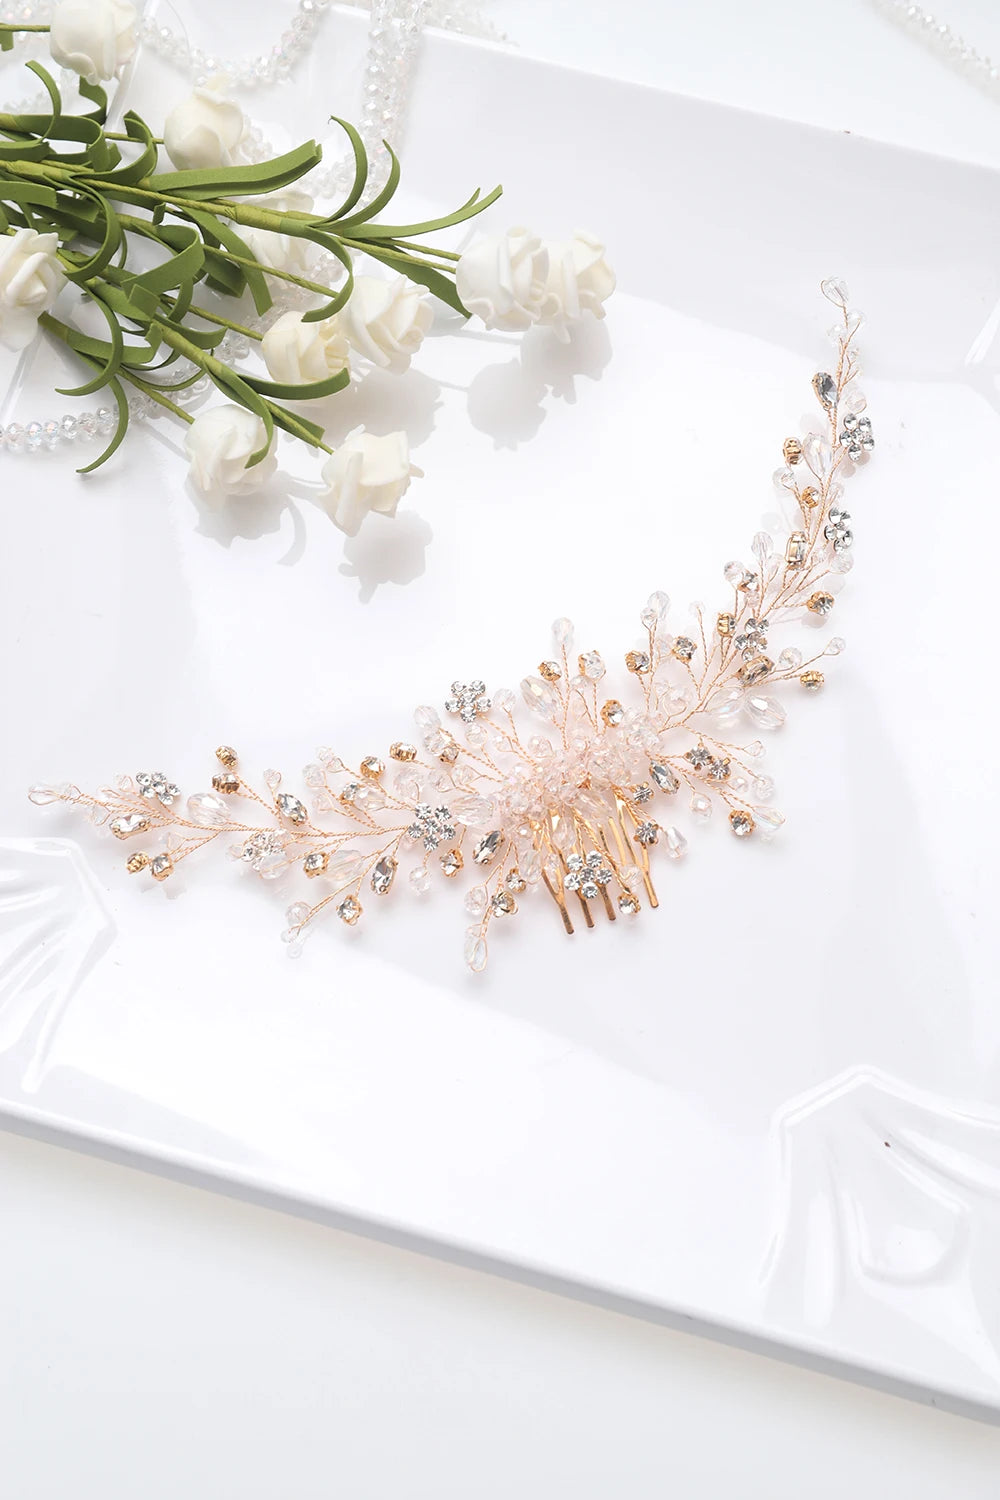 KIMLUD, Vintage Rose gold Silver Wedding Accessories bridal headwear Shiny Crystal Hair comb Elegant banquet for women, China / Rose Gold, KIMLUD Women's Clothes